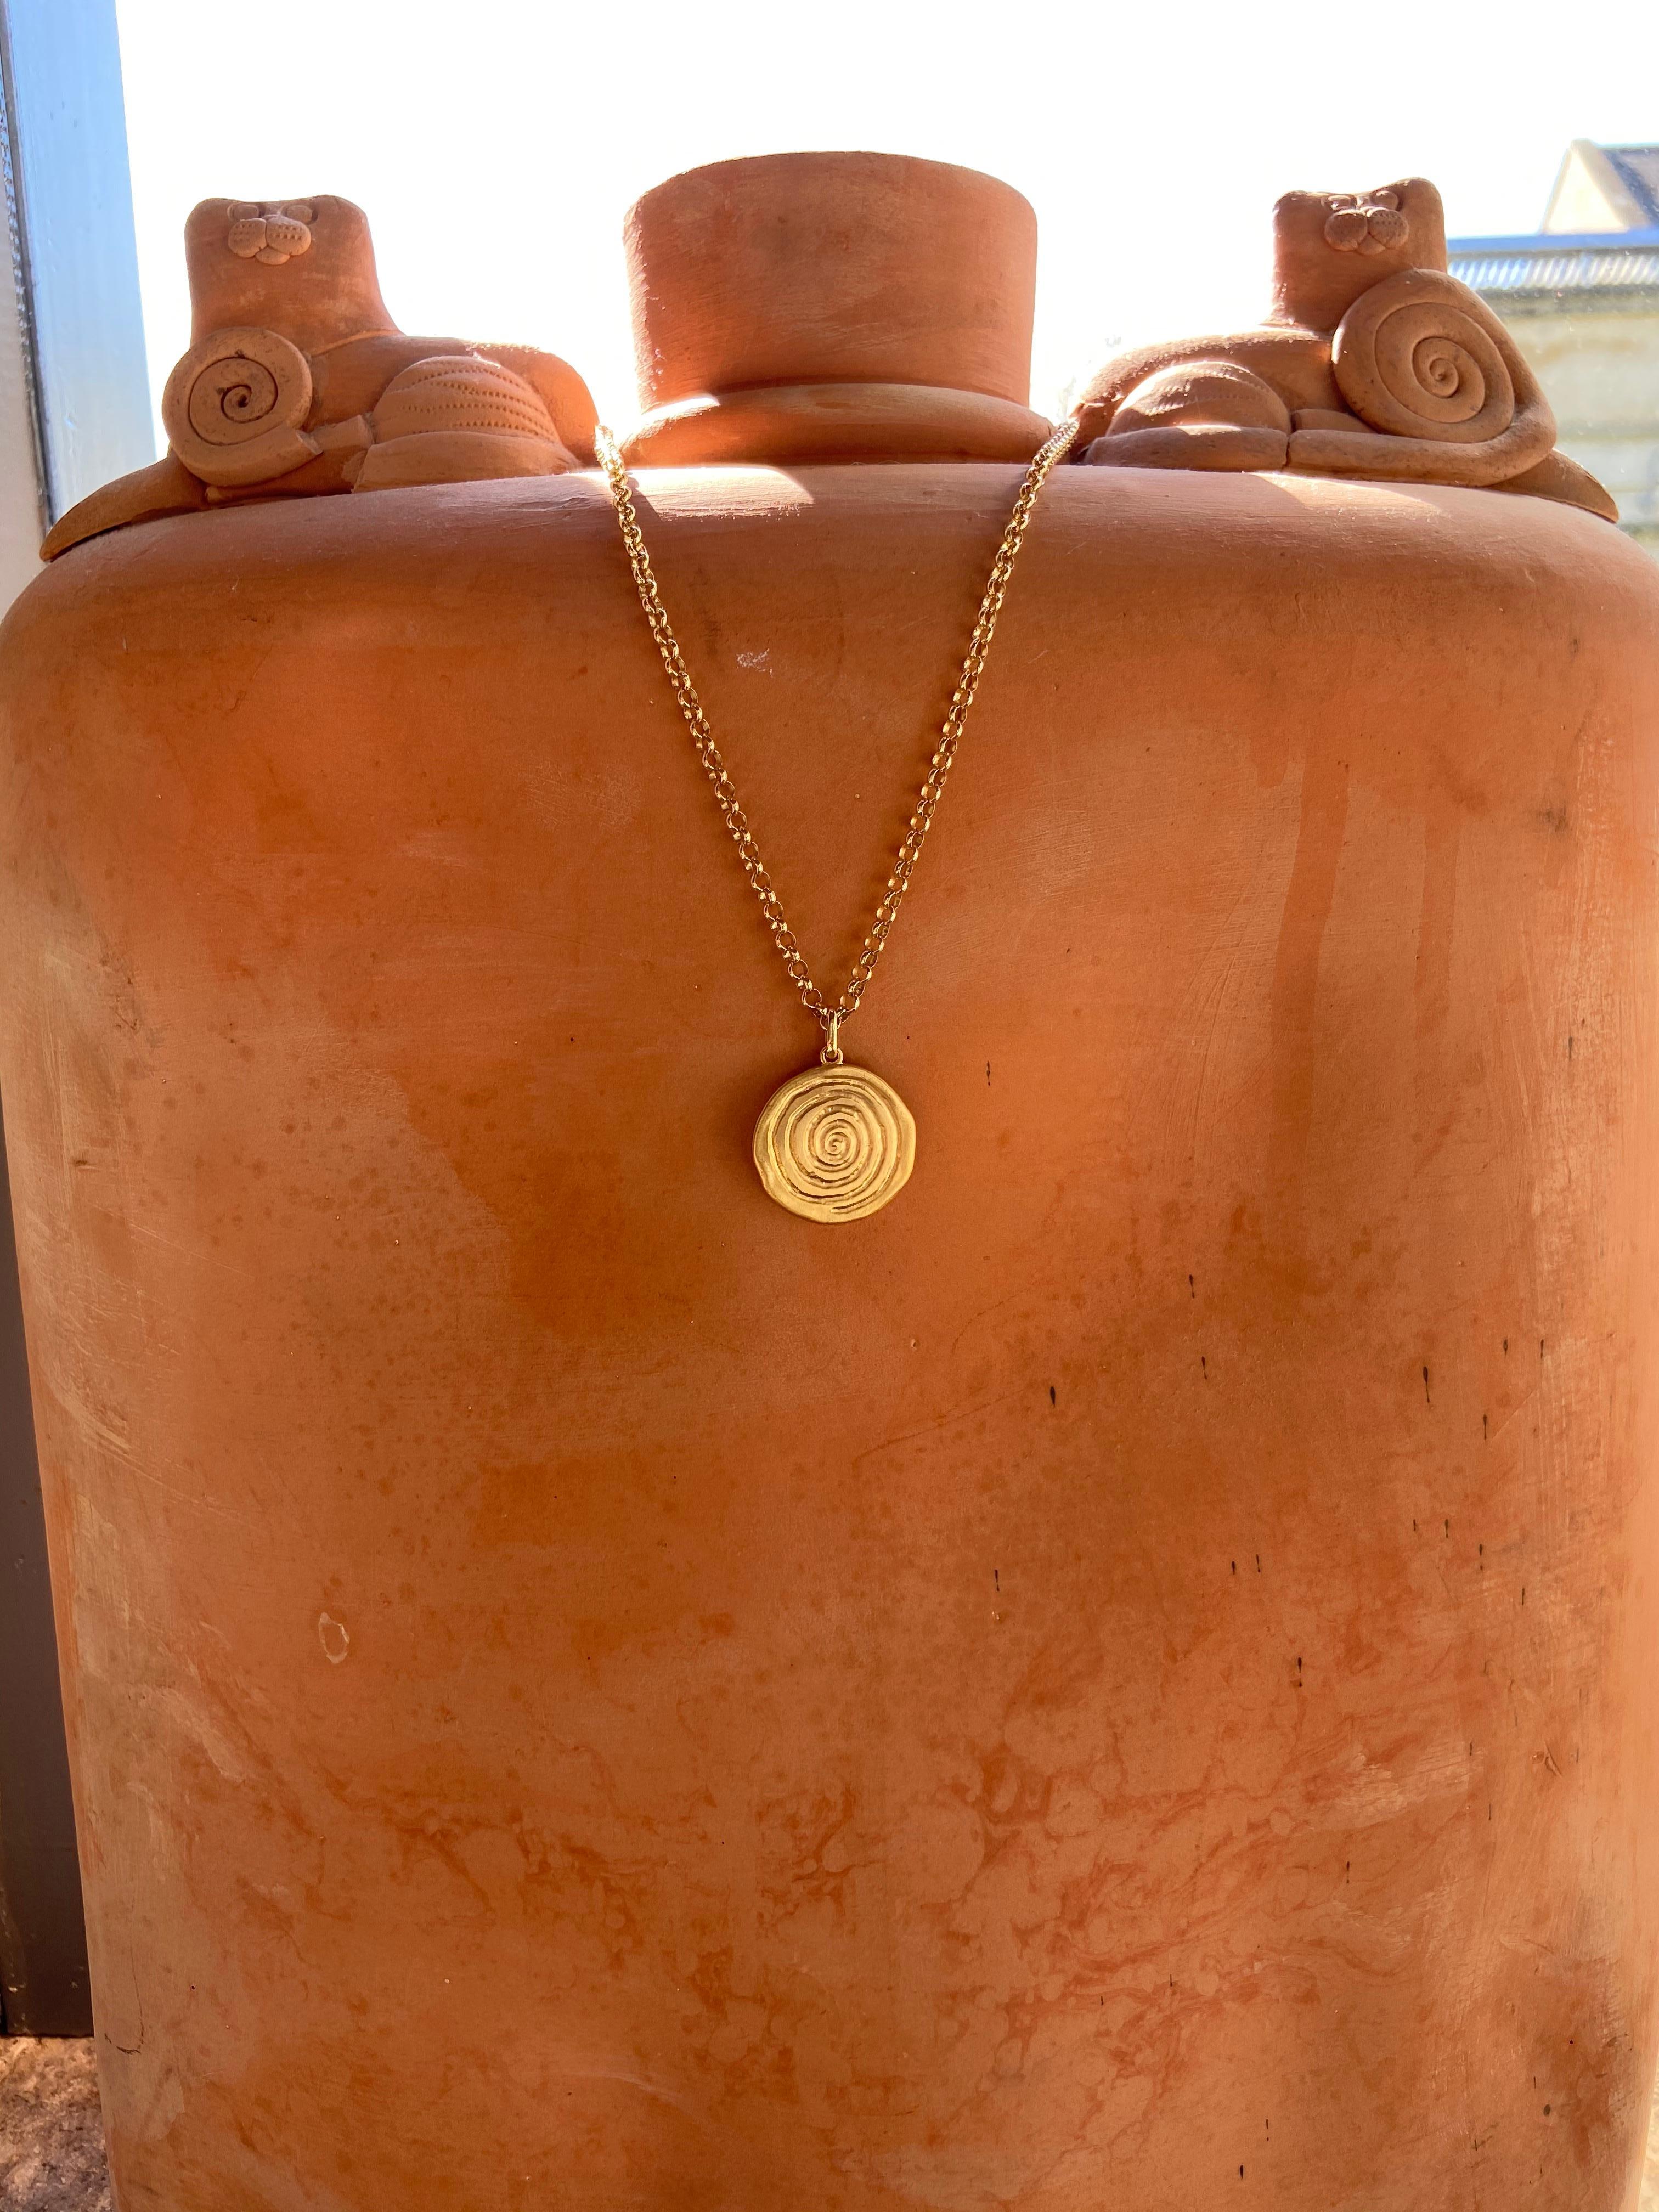 Infinity spiral necklace, hand engraved with the symbol of infinity and life. The infinity symbol holds a deep meaning in spirituality: Love, beauty and power. It represents simplicity and balance in a world filled with complications and